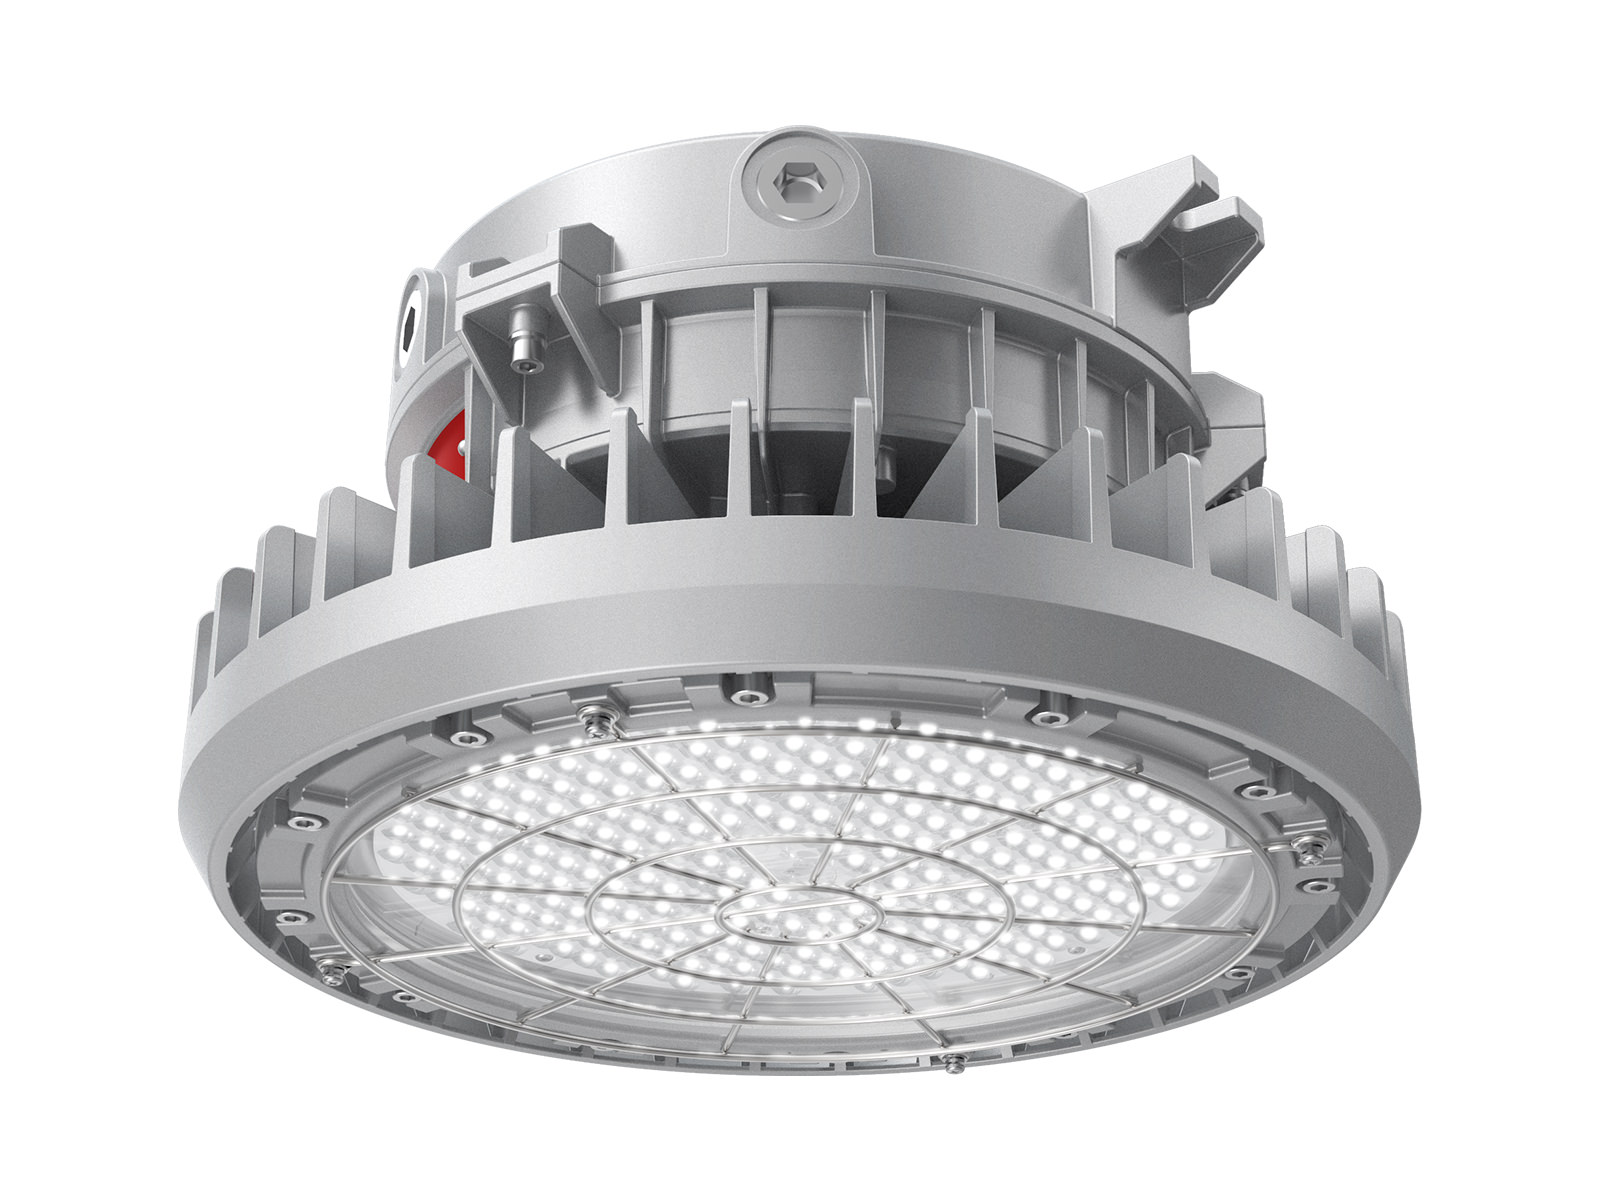 HA05 4,050 to 32,400lm LED ExplosIon Proof Light for Harsh and Hazardous Locations